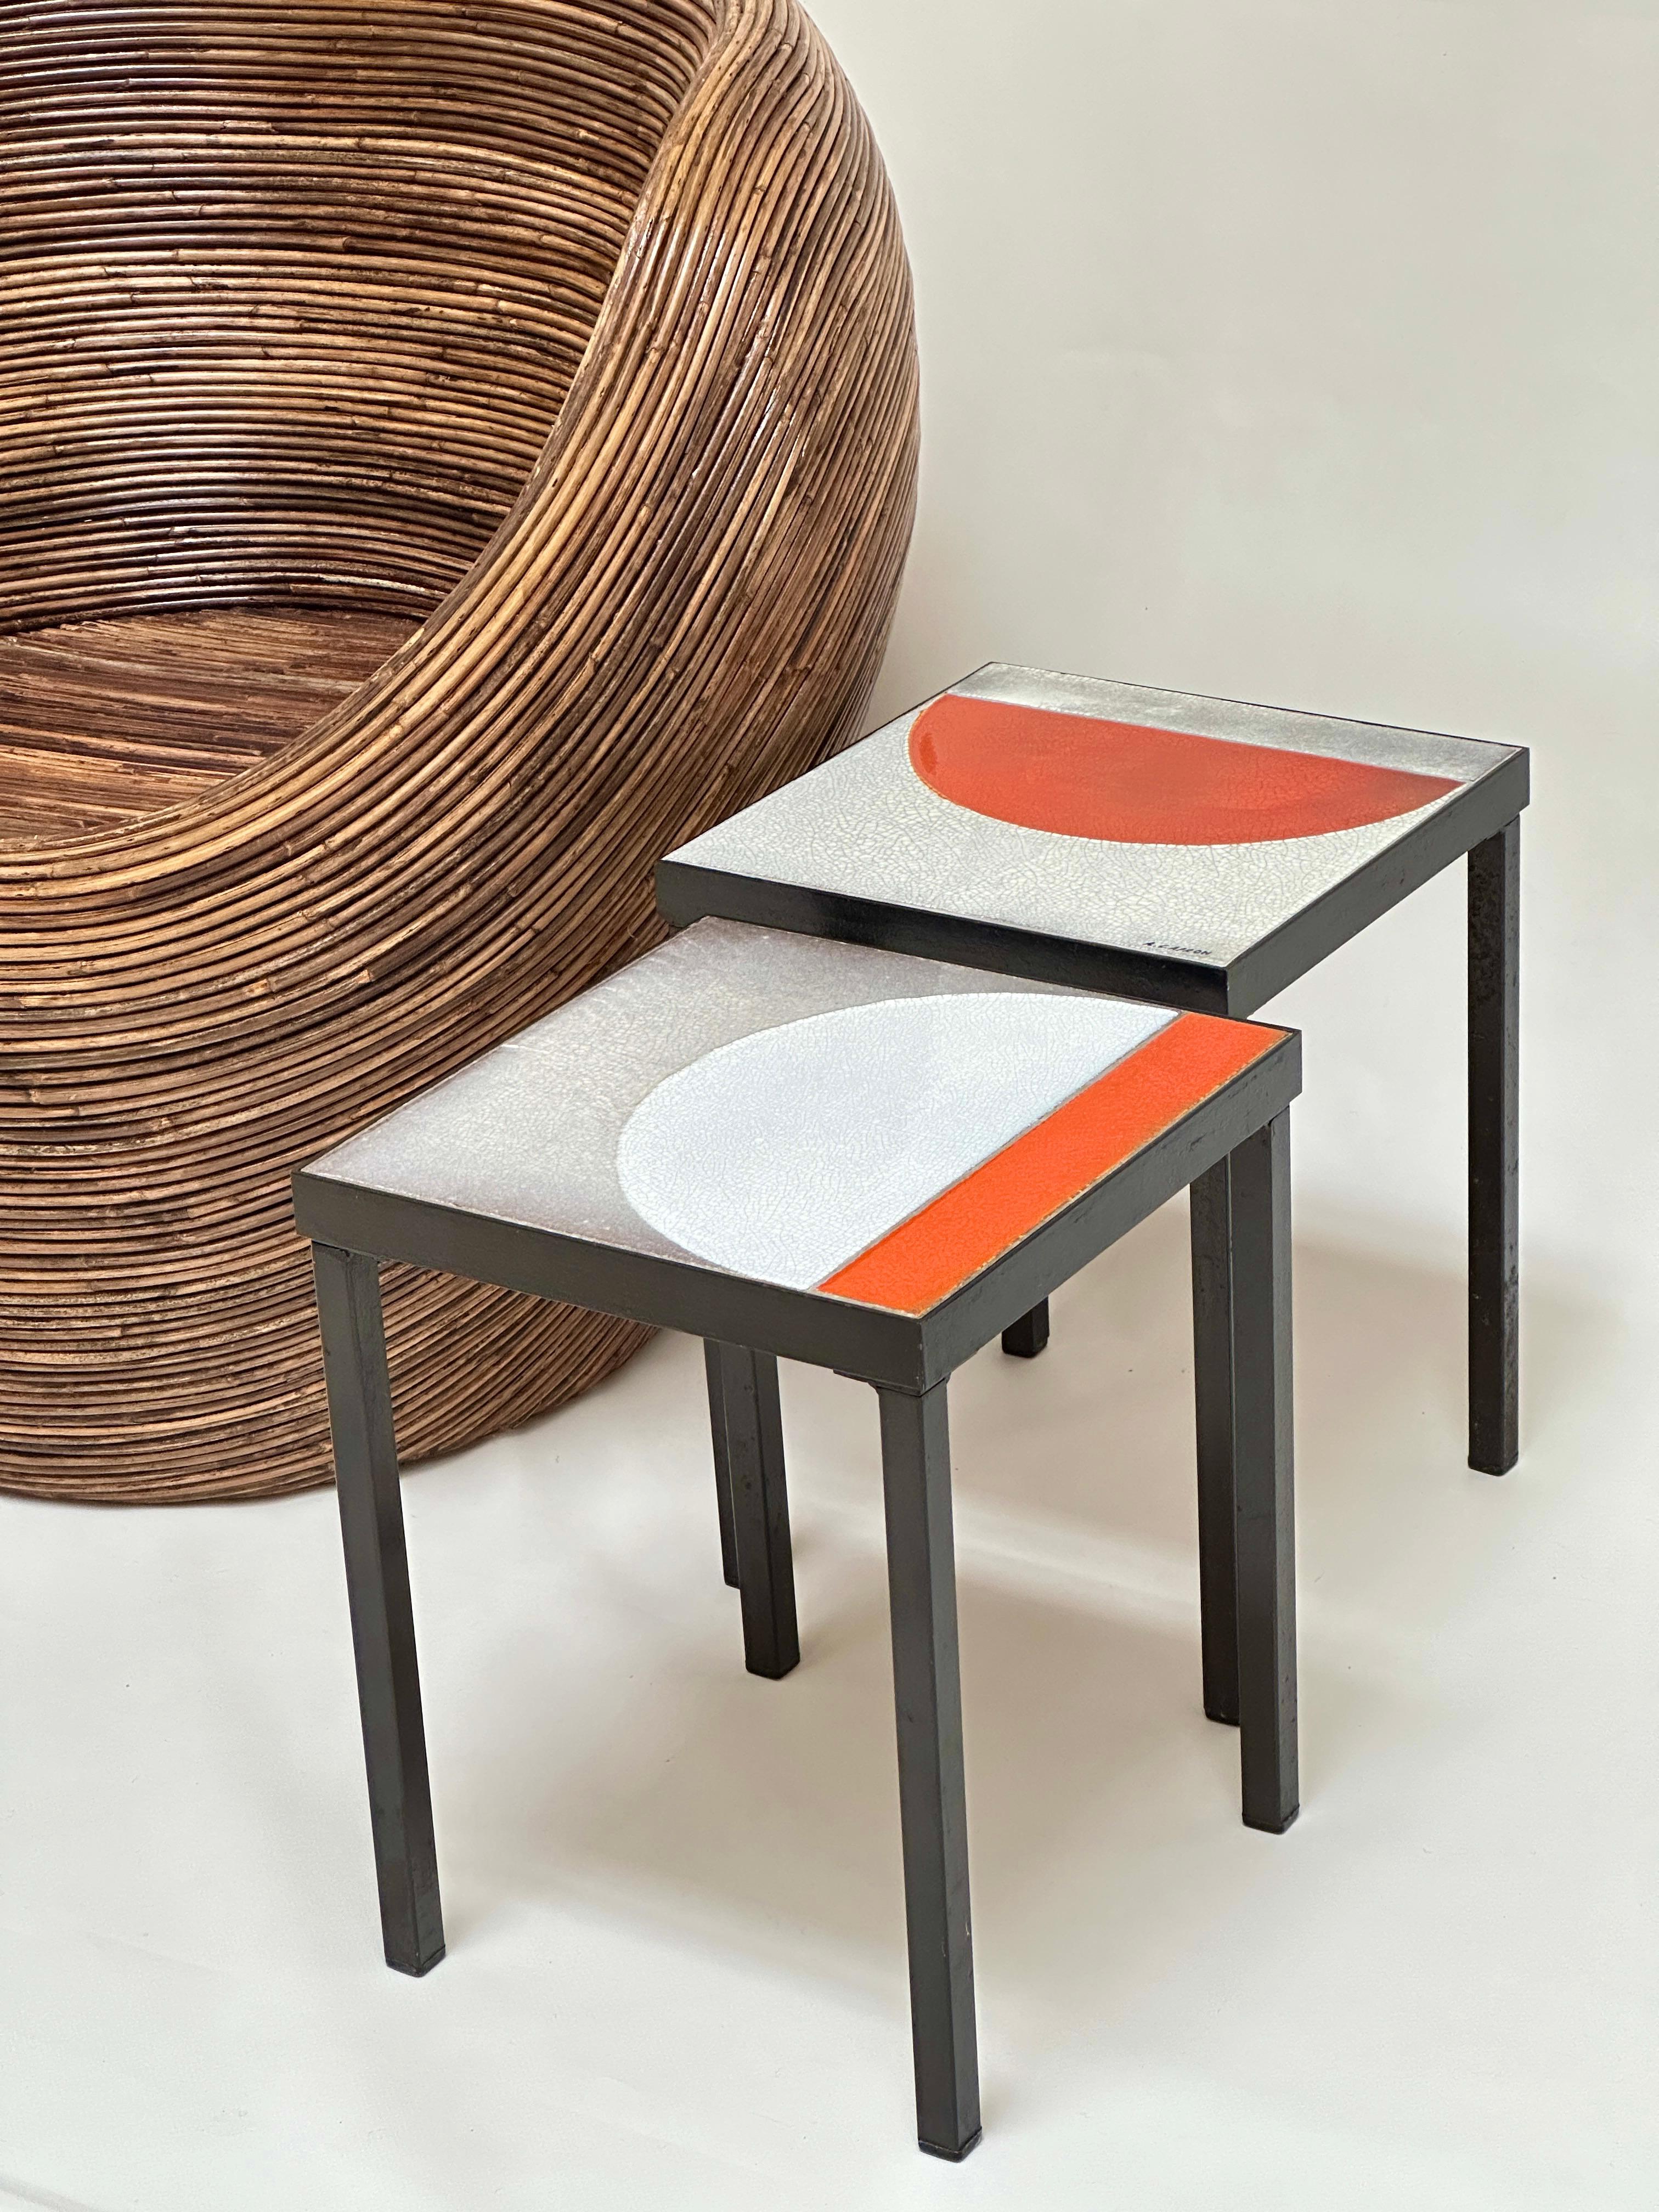 Pair of Low Tables, Roger Capron, Vallauris, c. 1965 For Sale 2